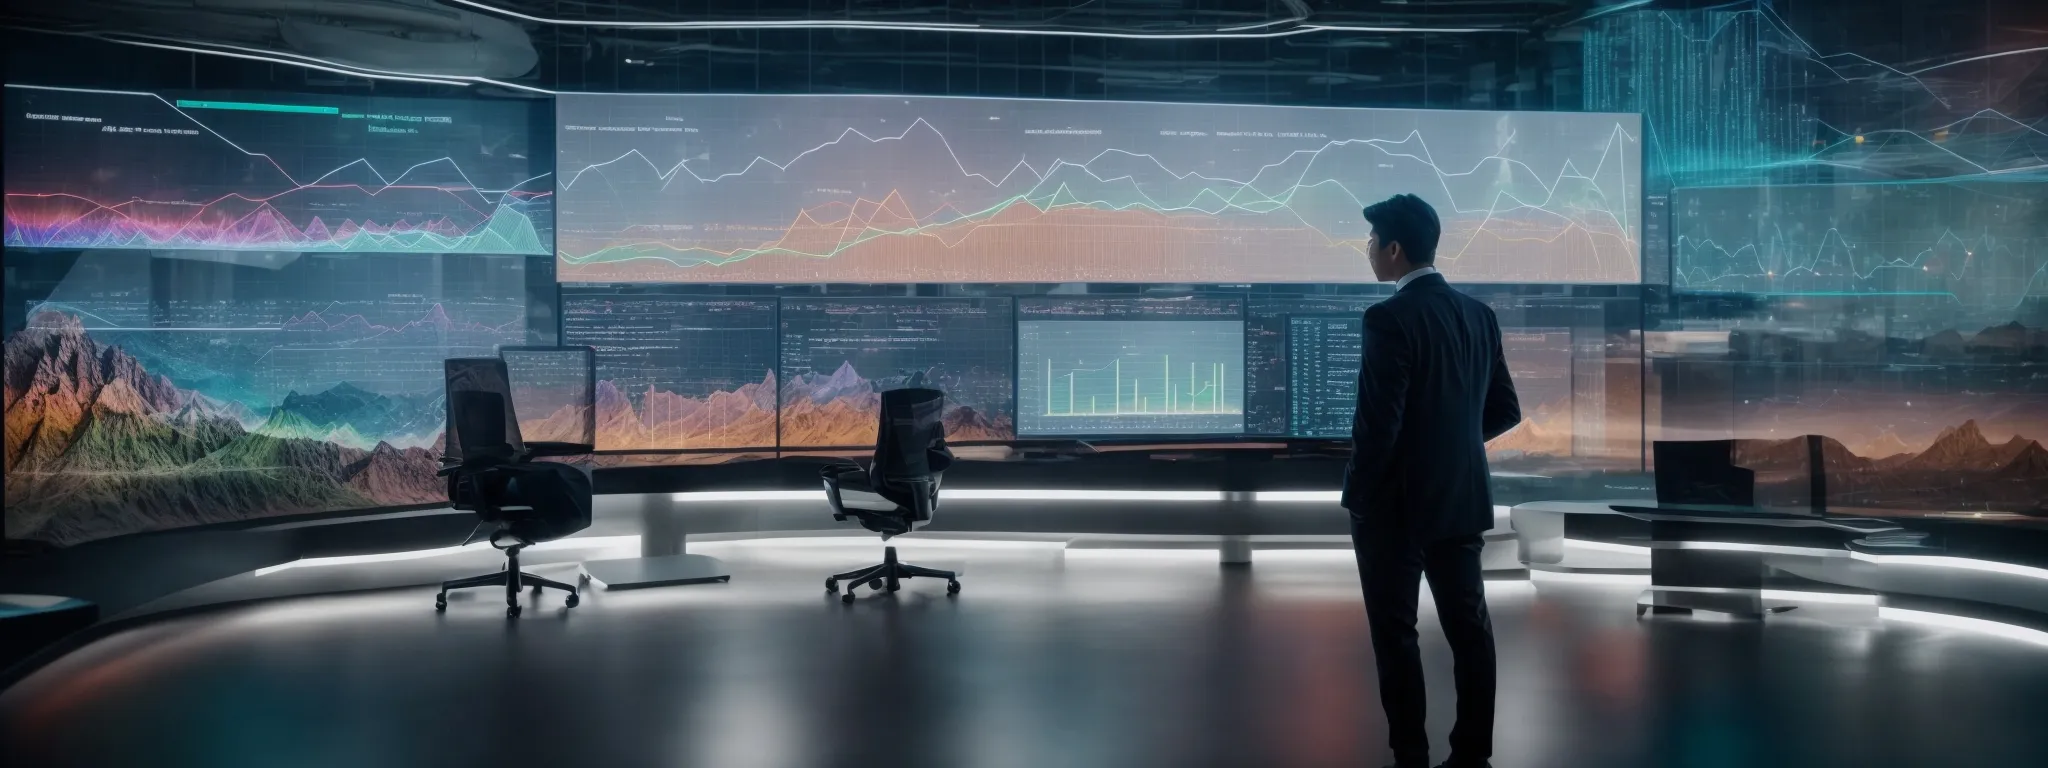 a person in a spacious, well-lit office interacts with a large, futuristic holographic screen displaying vibrant graphs and charts.